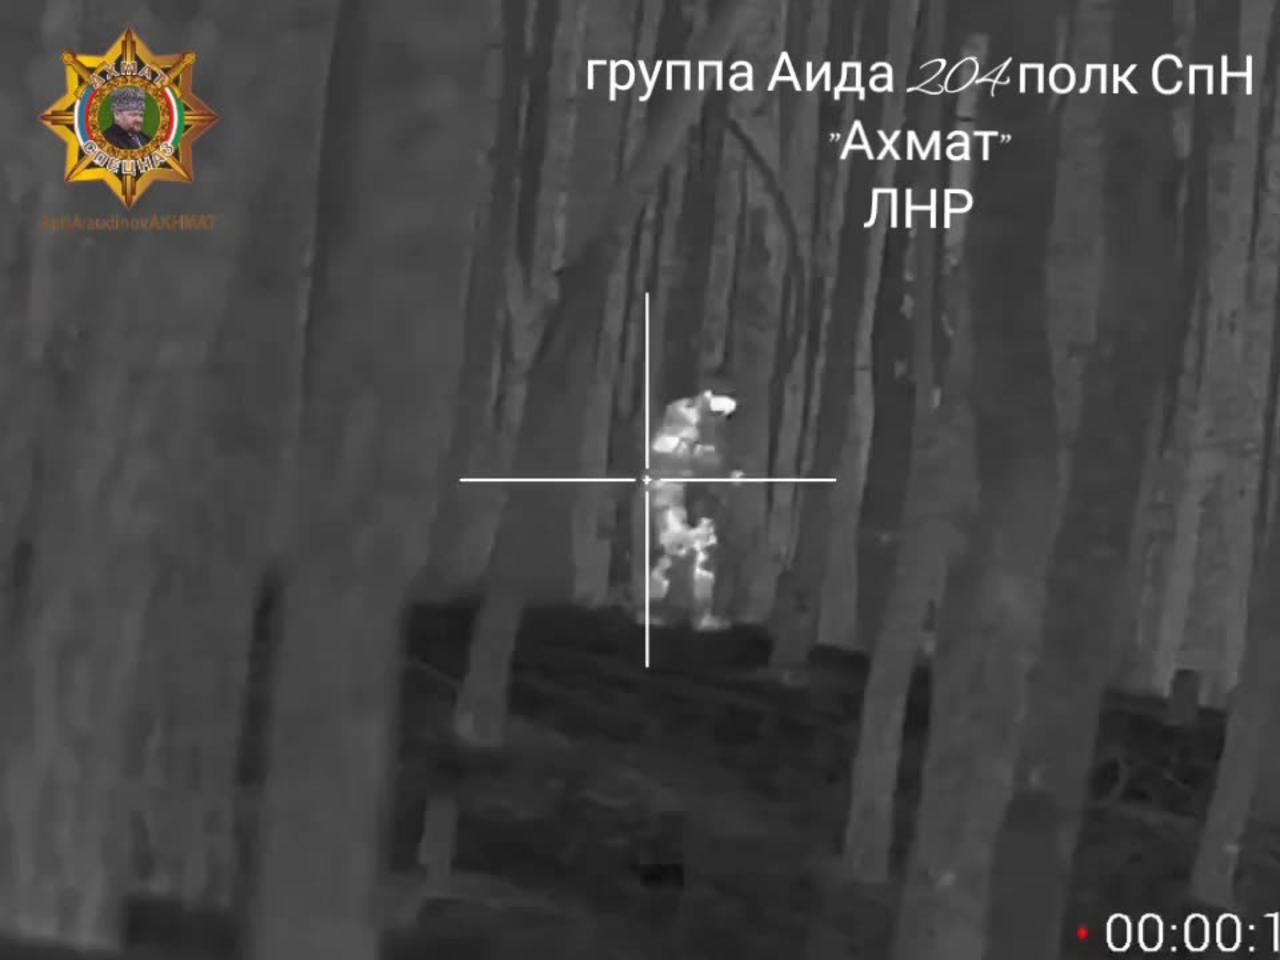 Russian sniper from Akhmat spetsnaz eliminate AFU sniper group